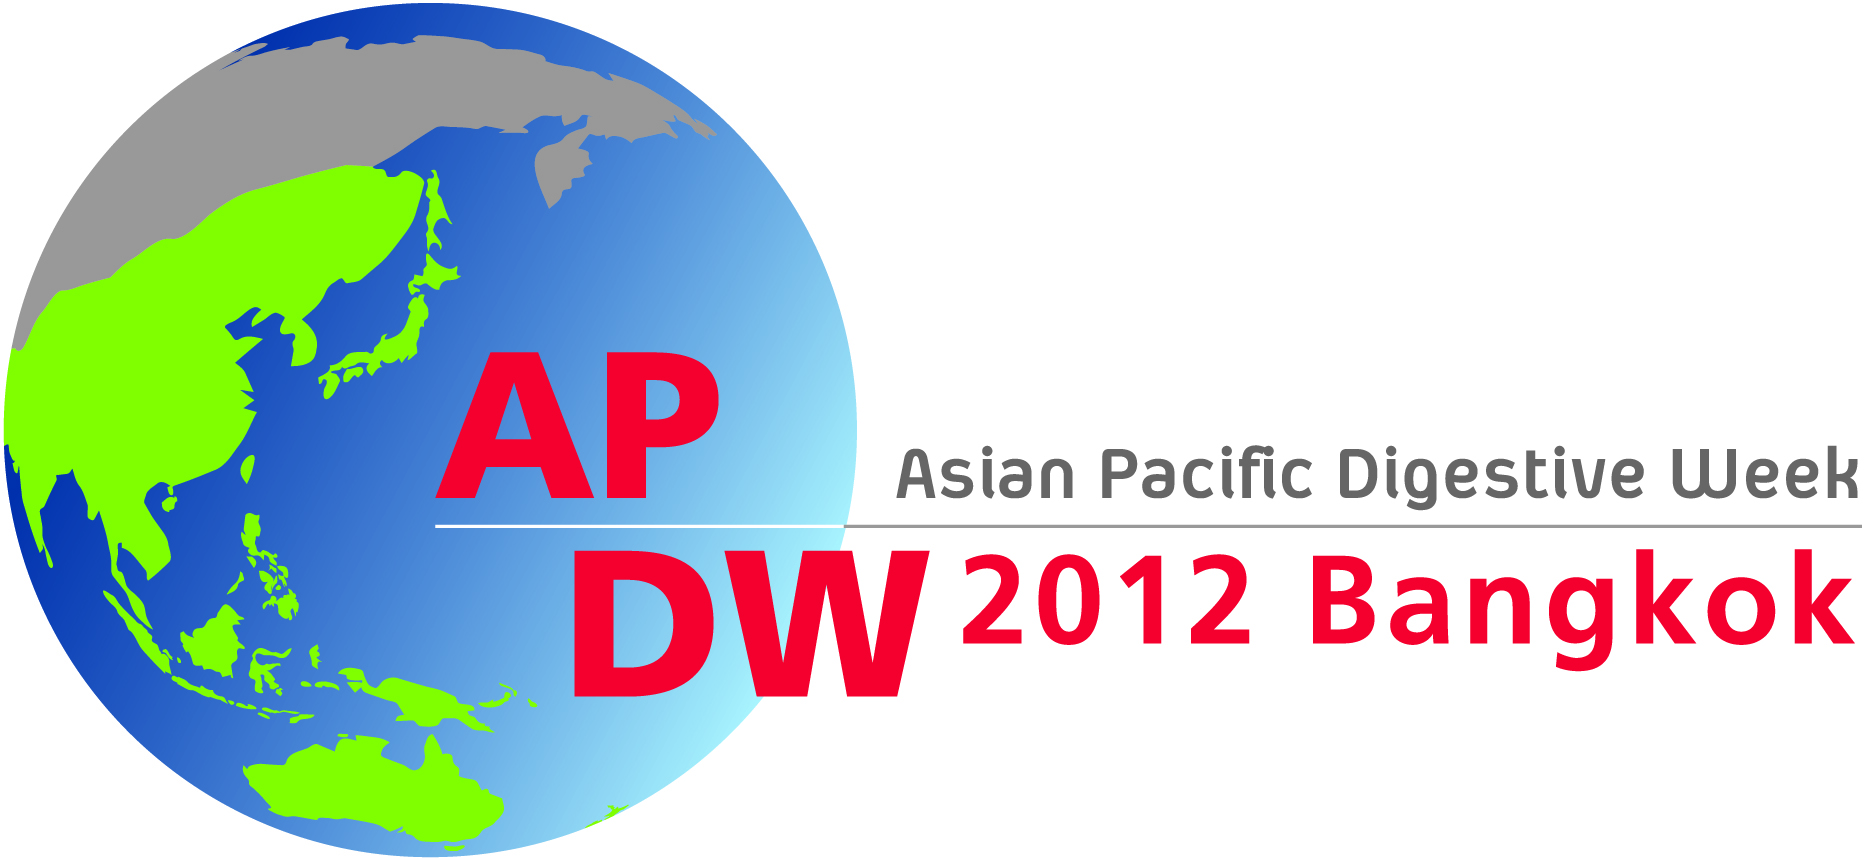 Asian Pacific Digestive Week (APDW2012)